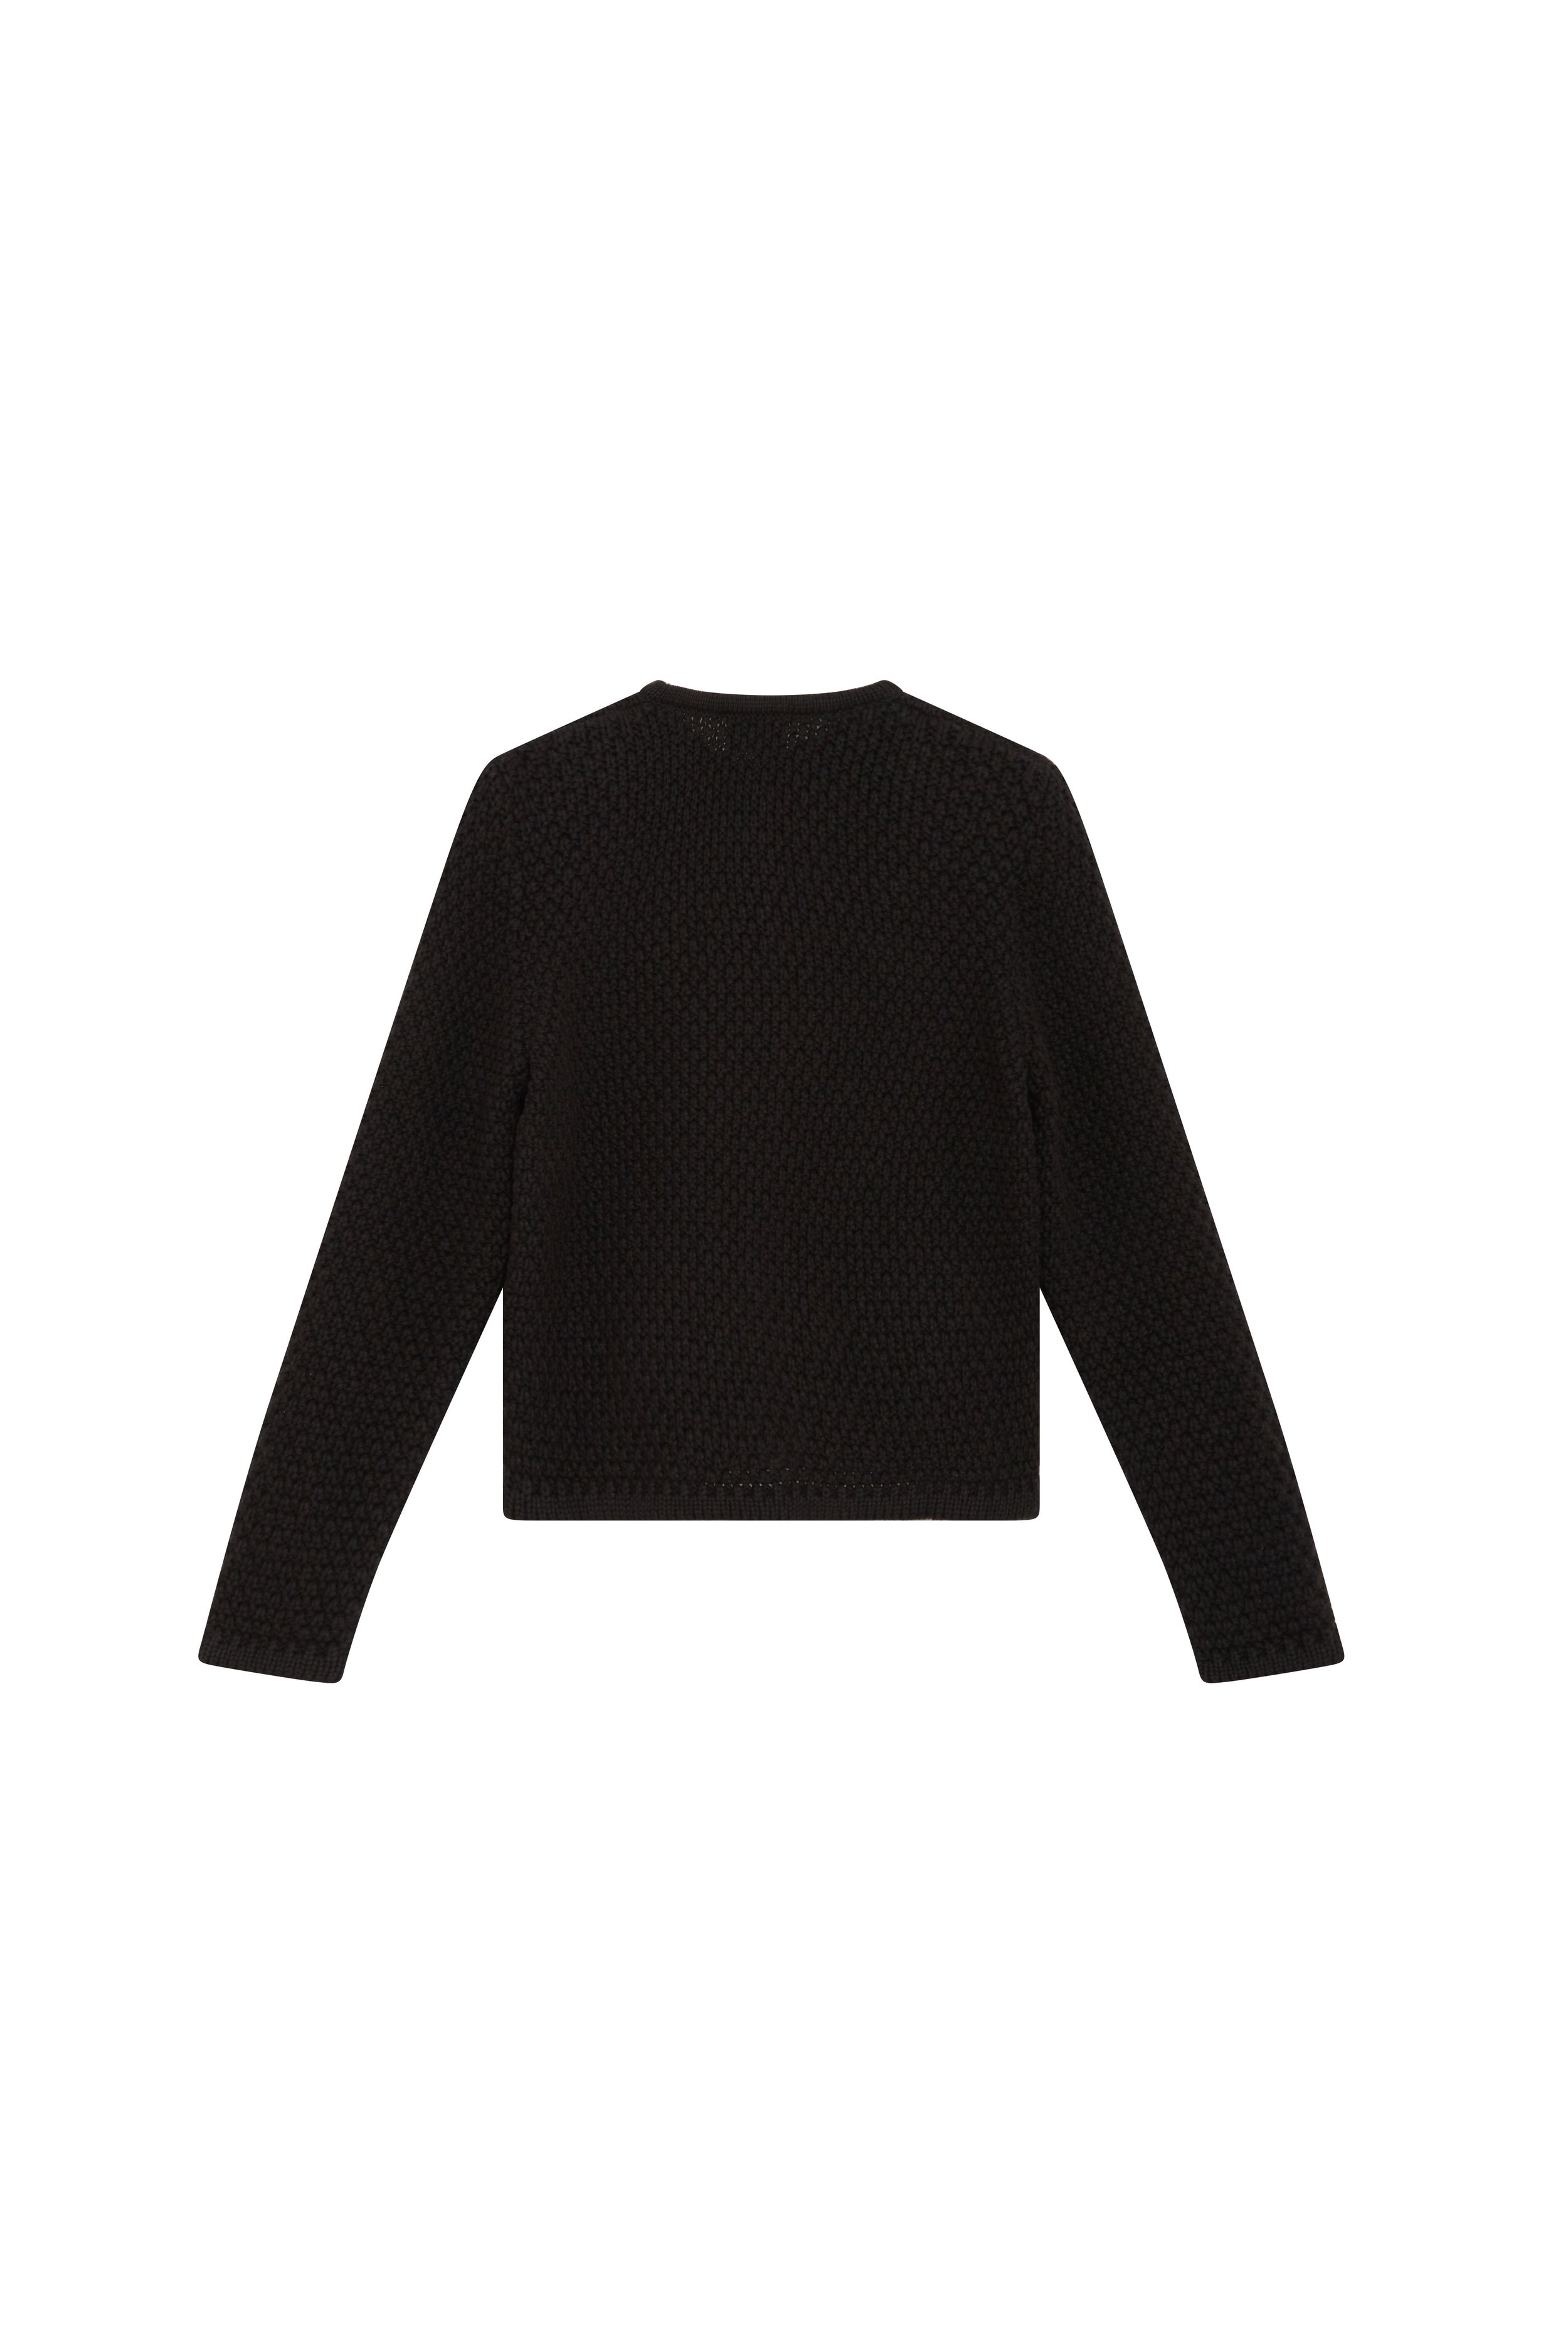 Le Francisco - Ultra-Desirable Knitted Jacket — Rosae Paris